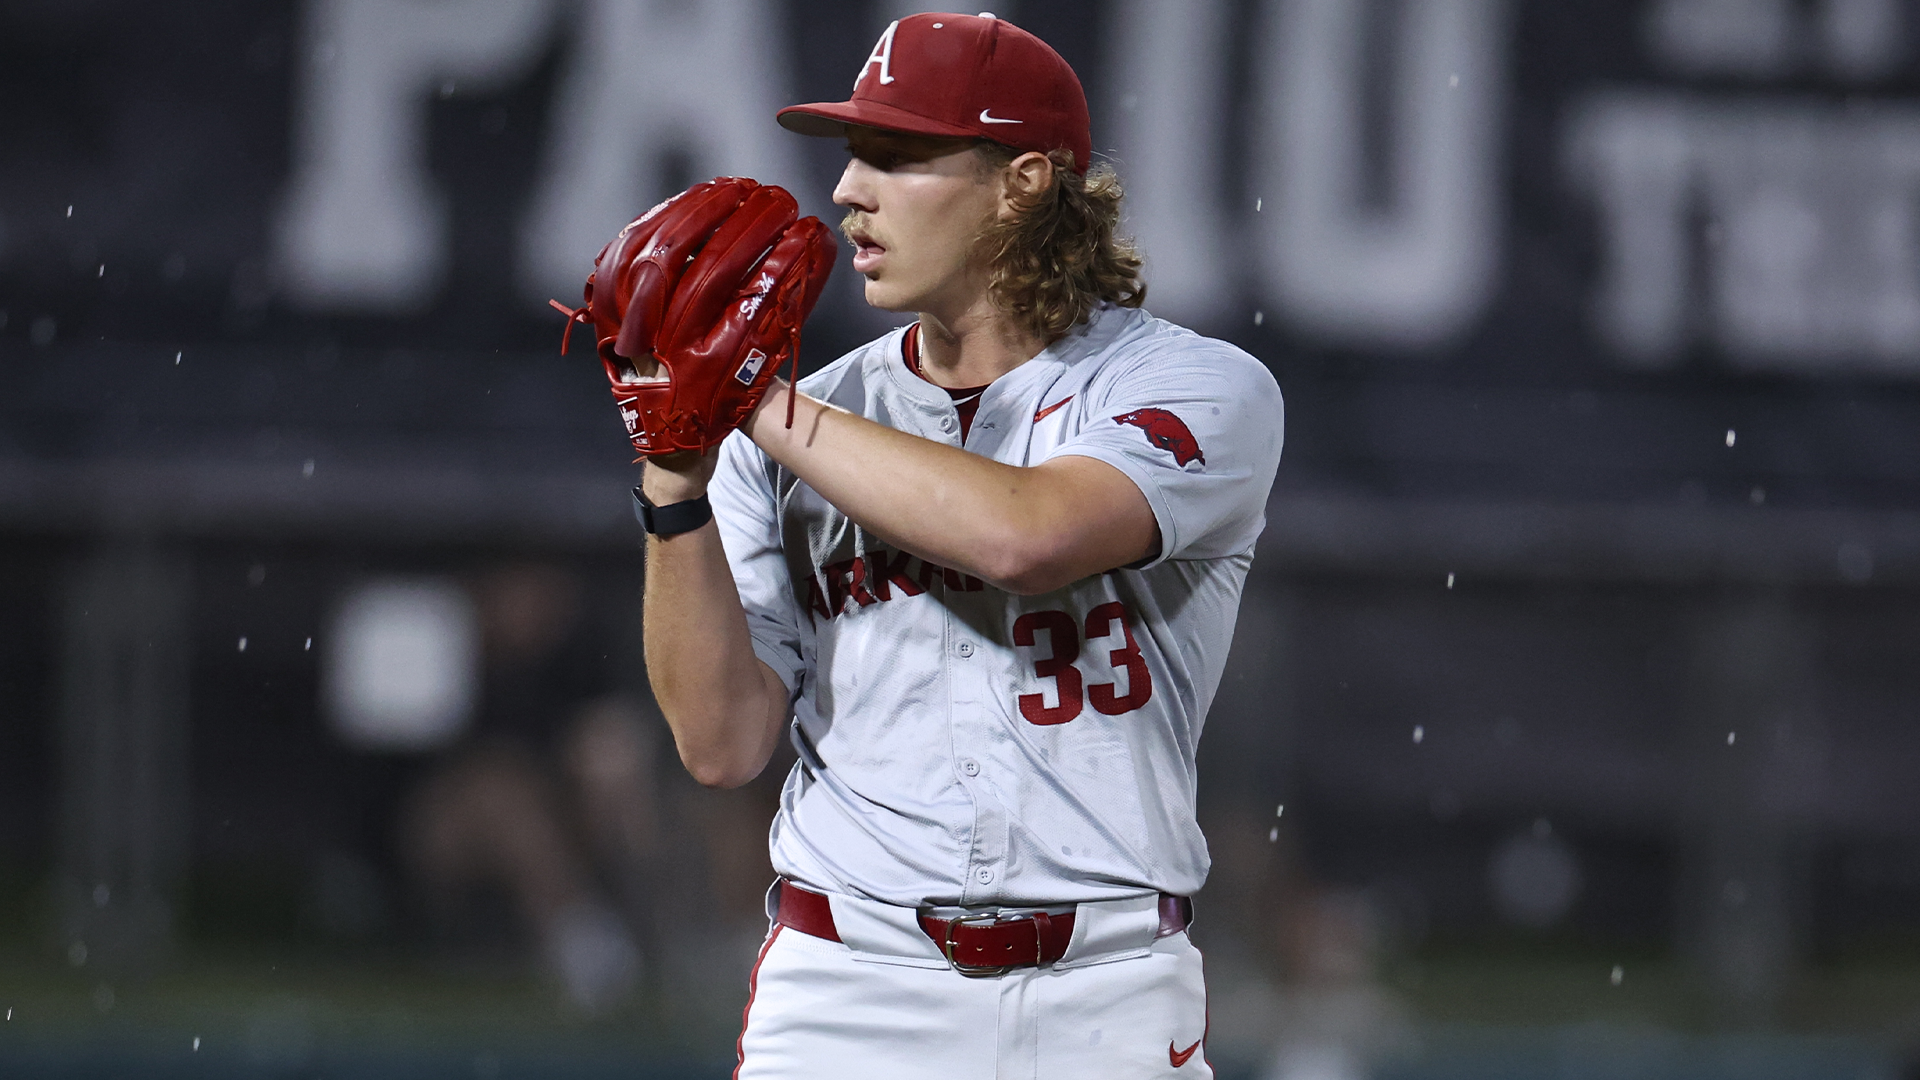 Smith Becomes Razorbacks’ Strikeout King in Extra-Inning Loss to Aggies